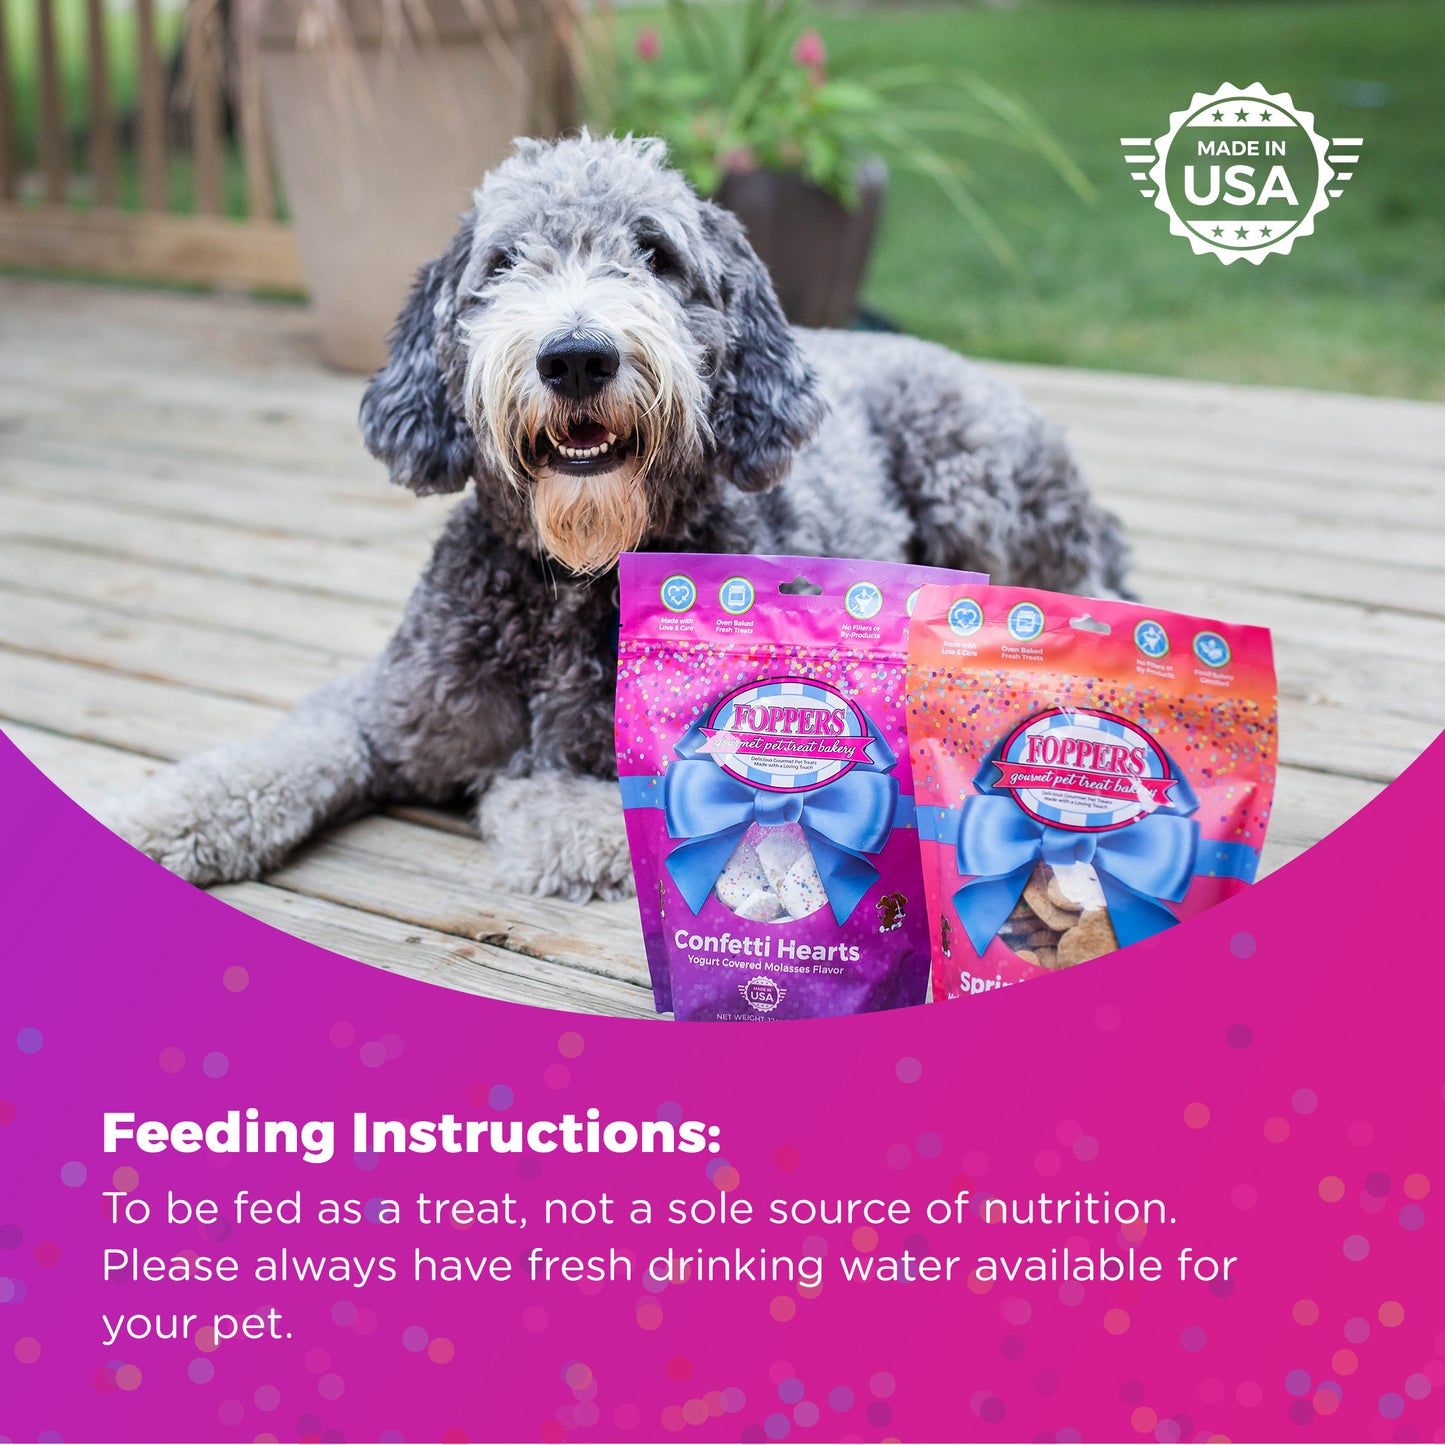 Feeding Instructions: To be fed as a treat, not a sole source of nutrition. Please always have fresh drinking water available for your pet.